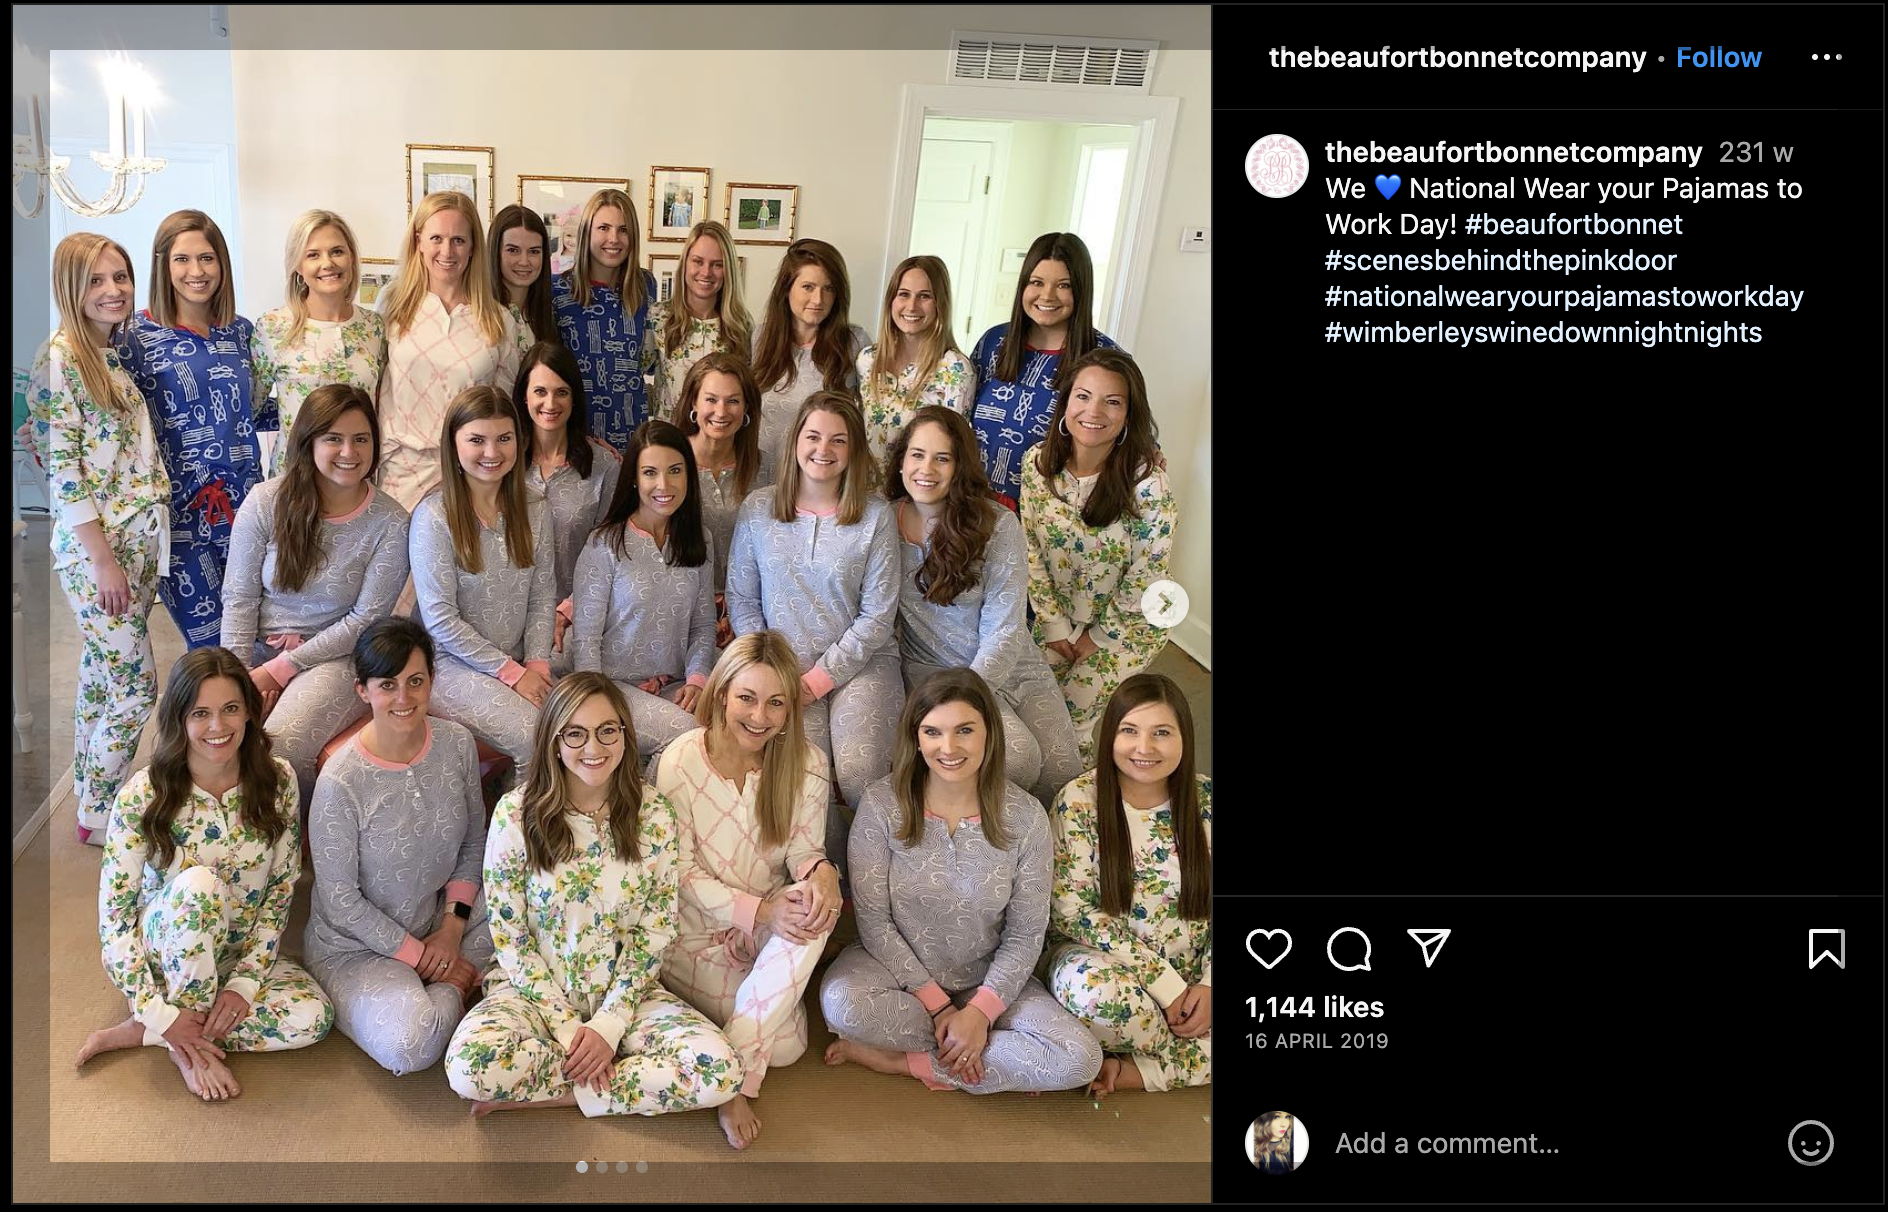 The Beaufort Bonnet Company - National Wear Your Pajamas to Work Day Post